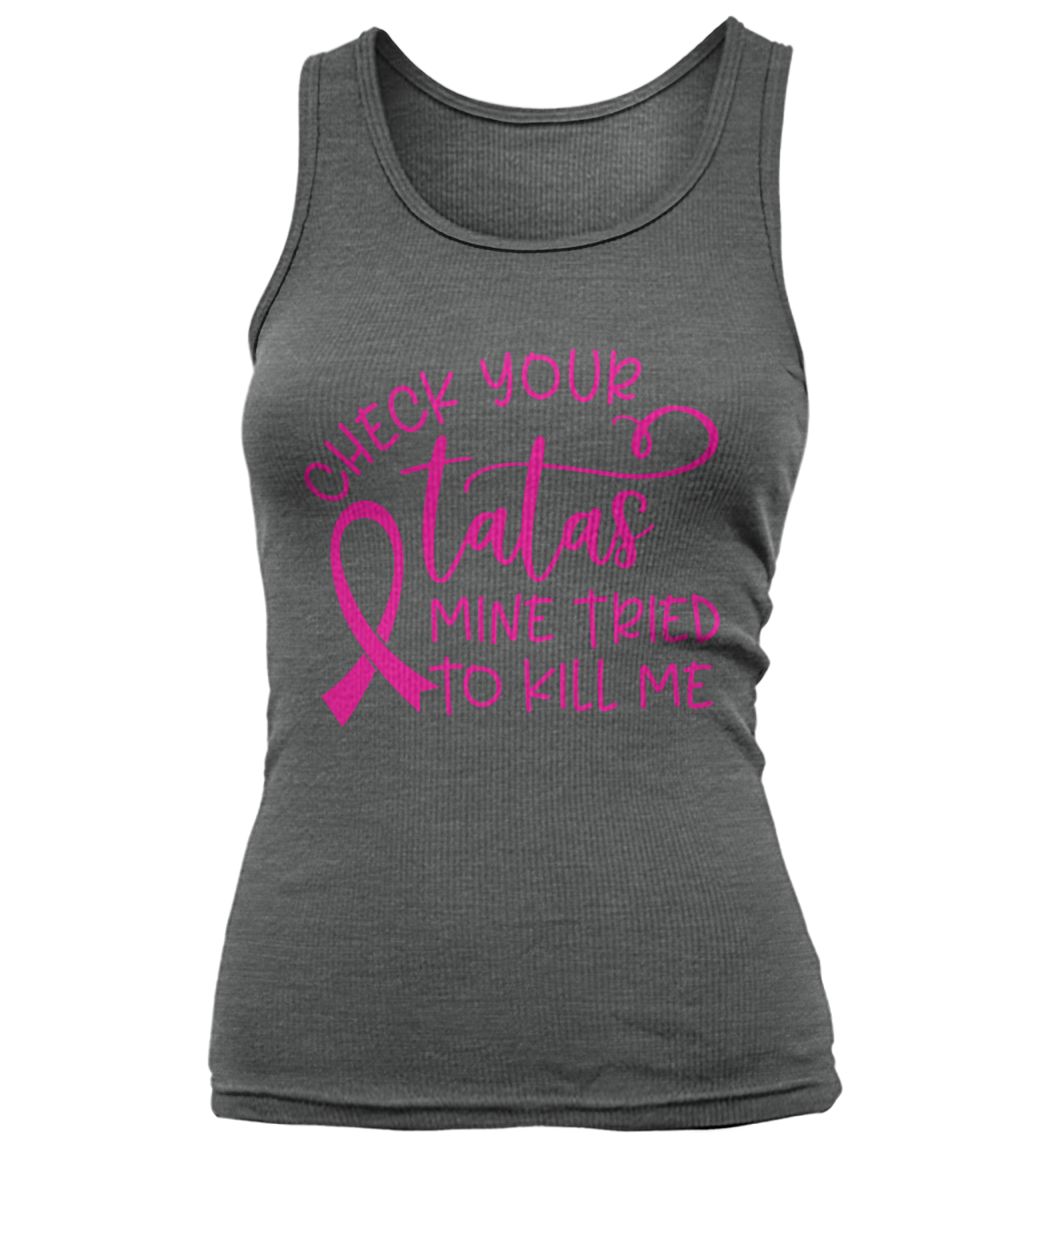 Breast cancer check your tatas mine tried to kill me women's tank top